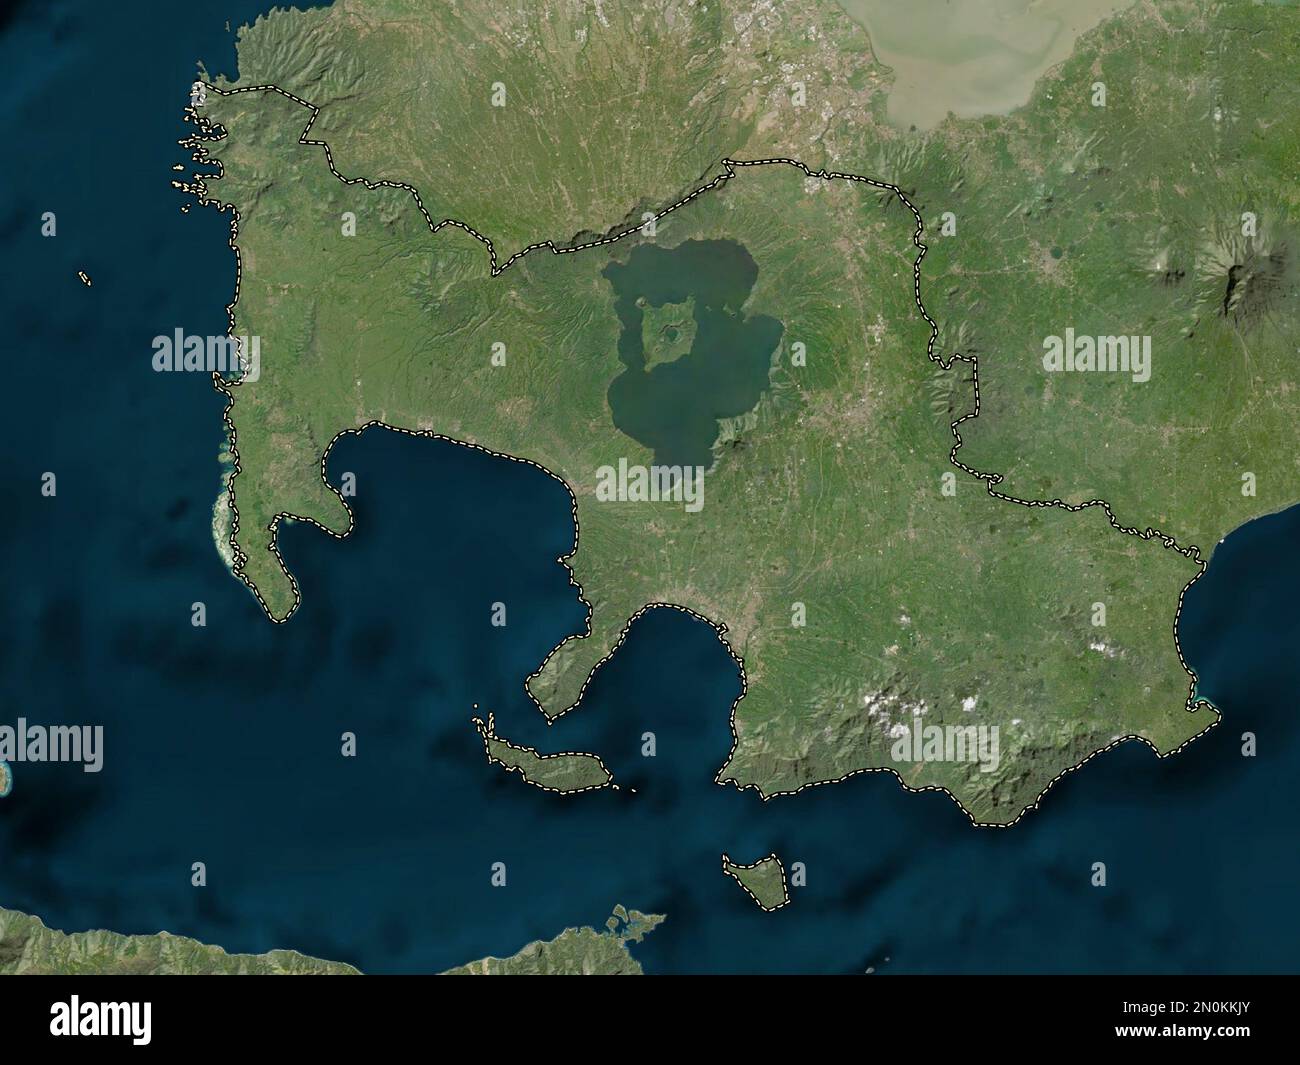 Batangas, province of Philippines. Low resolution satellite map Stock Photo